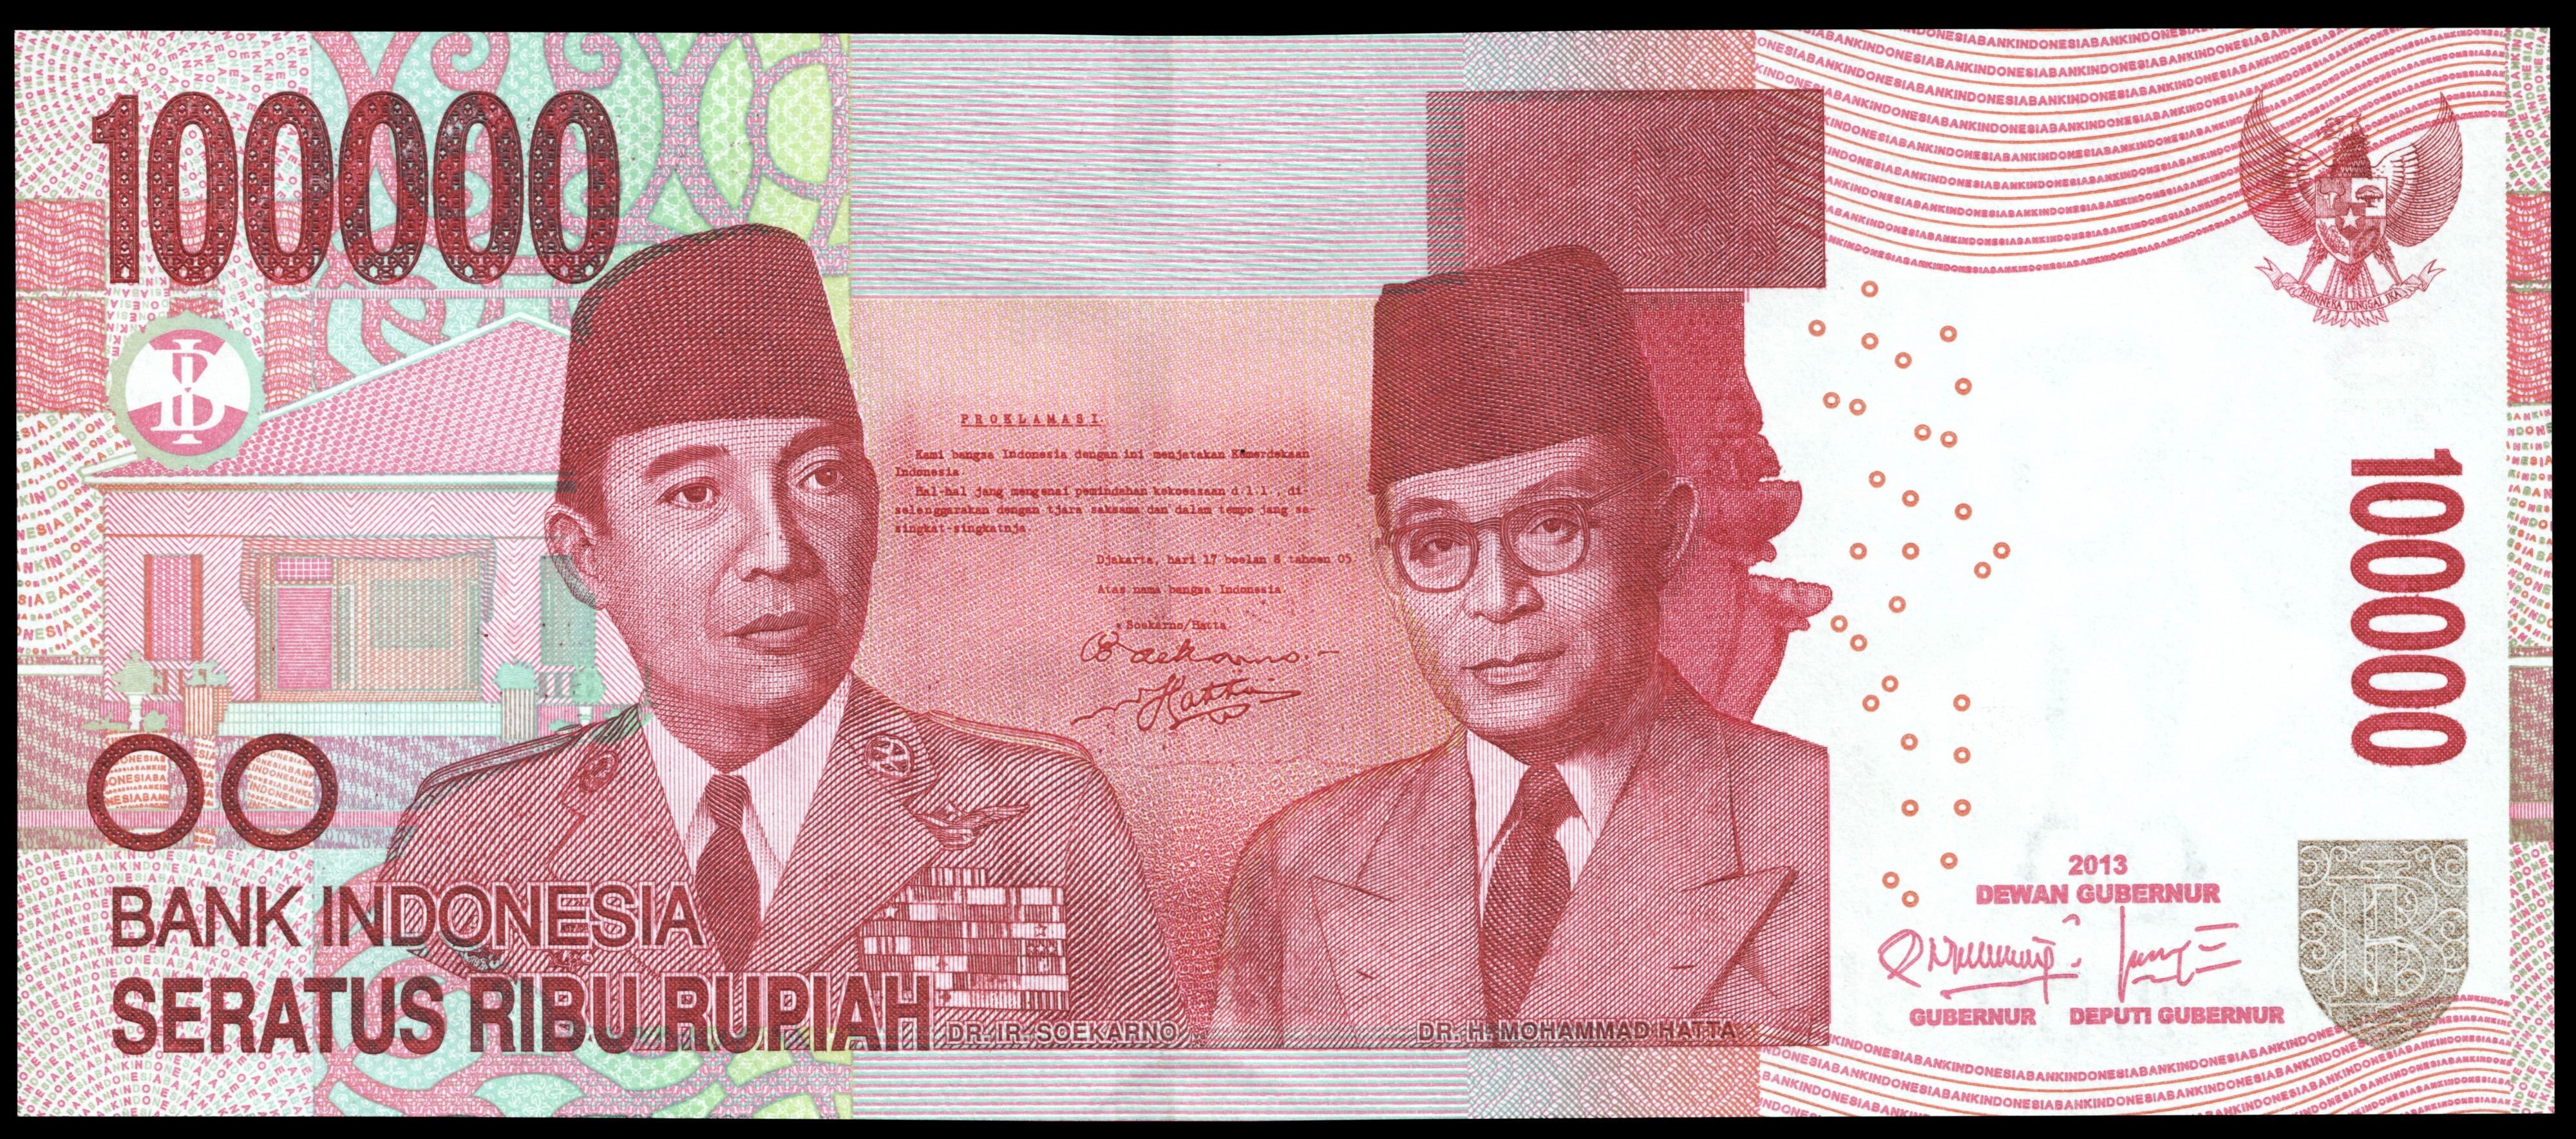 100000 rupiah bill, 2011 revision (2013 date), processed, obverse